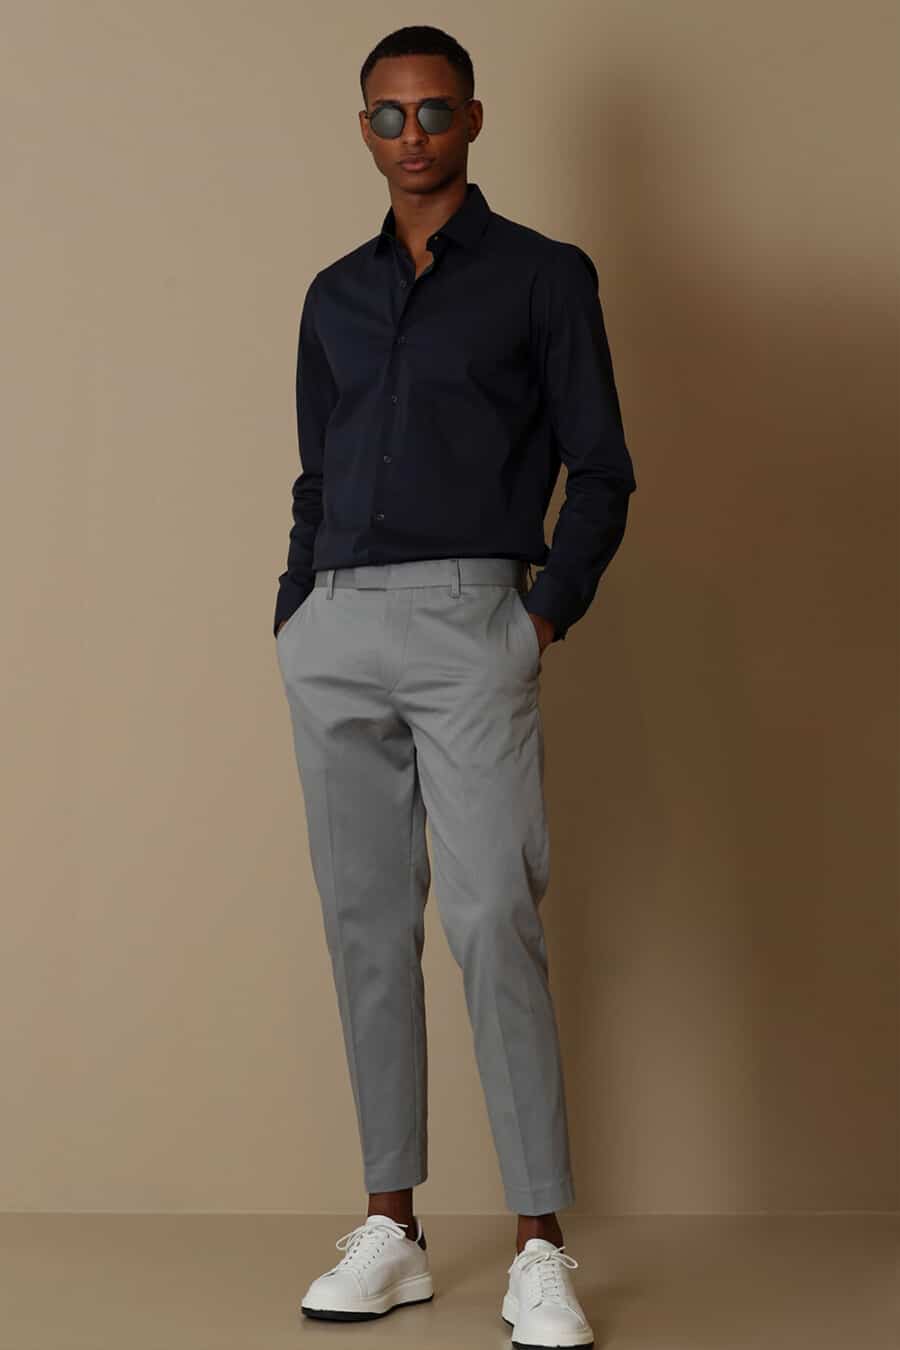 Grey Pants Brown Shoes: How To Master This Outfit! (Men)